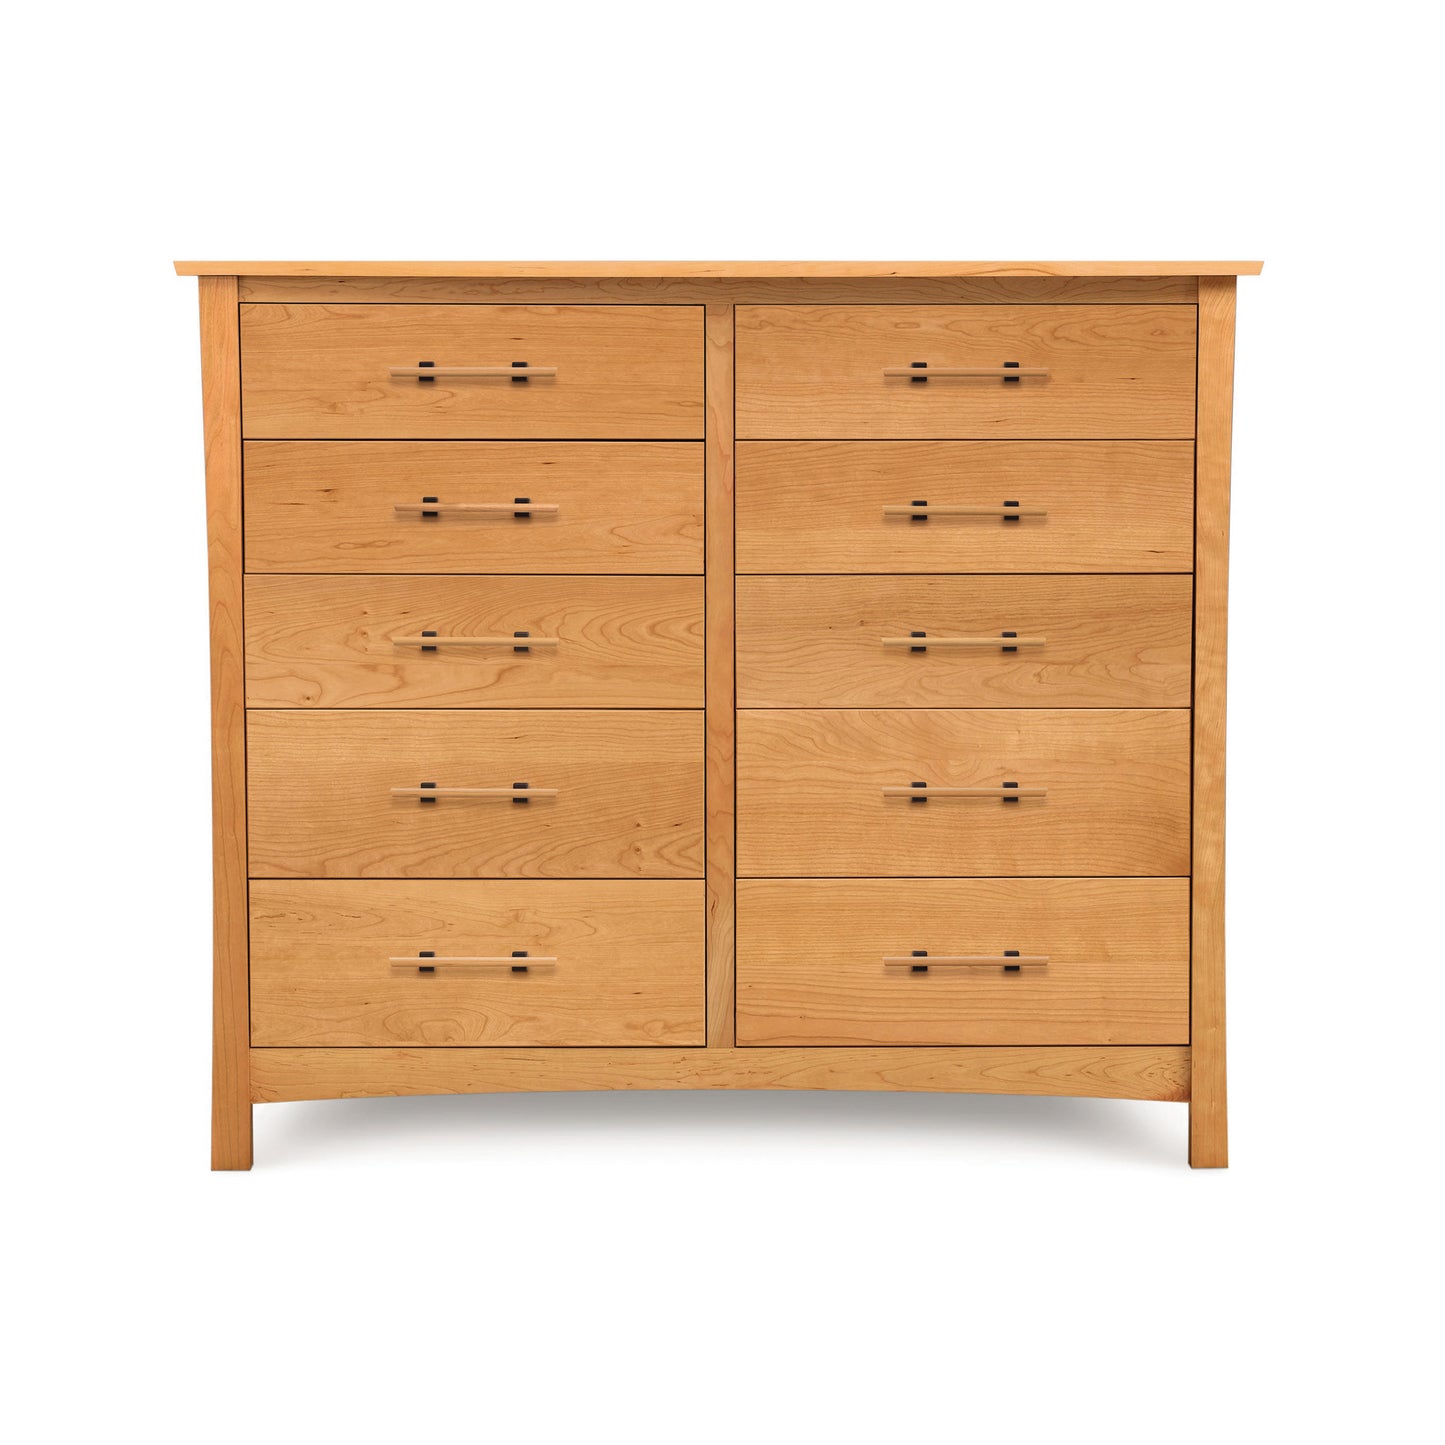 Monterey 10-Drawer Dresser by Copeland Furniture crafted from eco-friendly cherry wood, with five drawers on each side, featuring simple handles and a flat top, isolated against a white background.